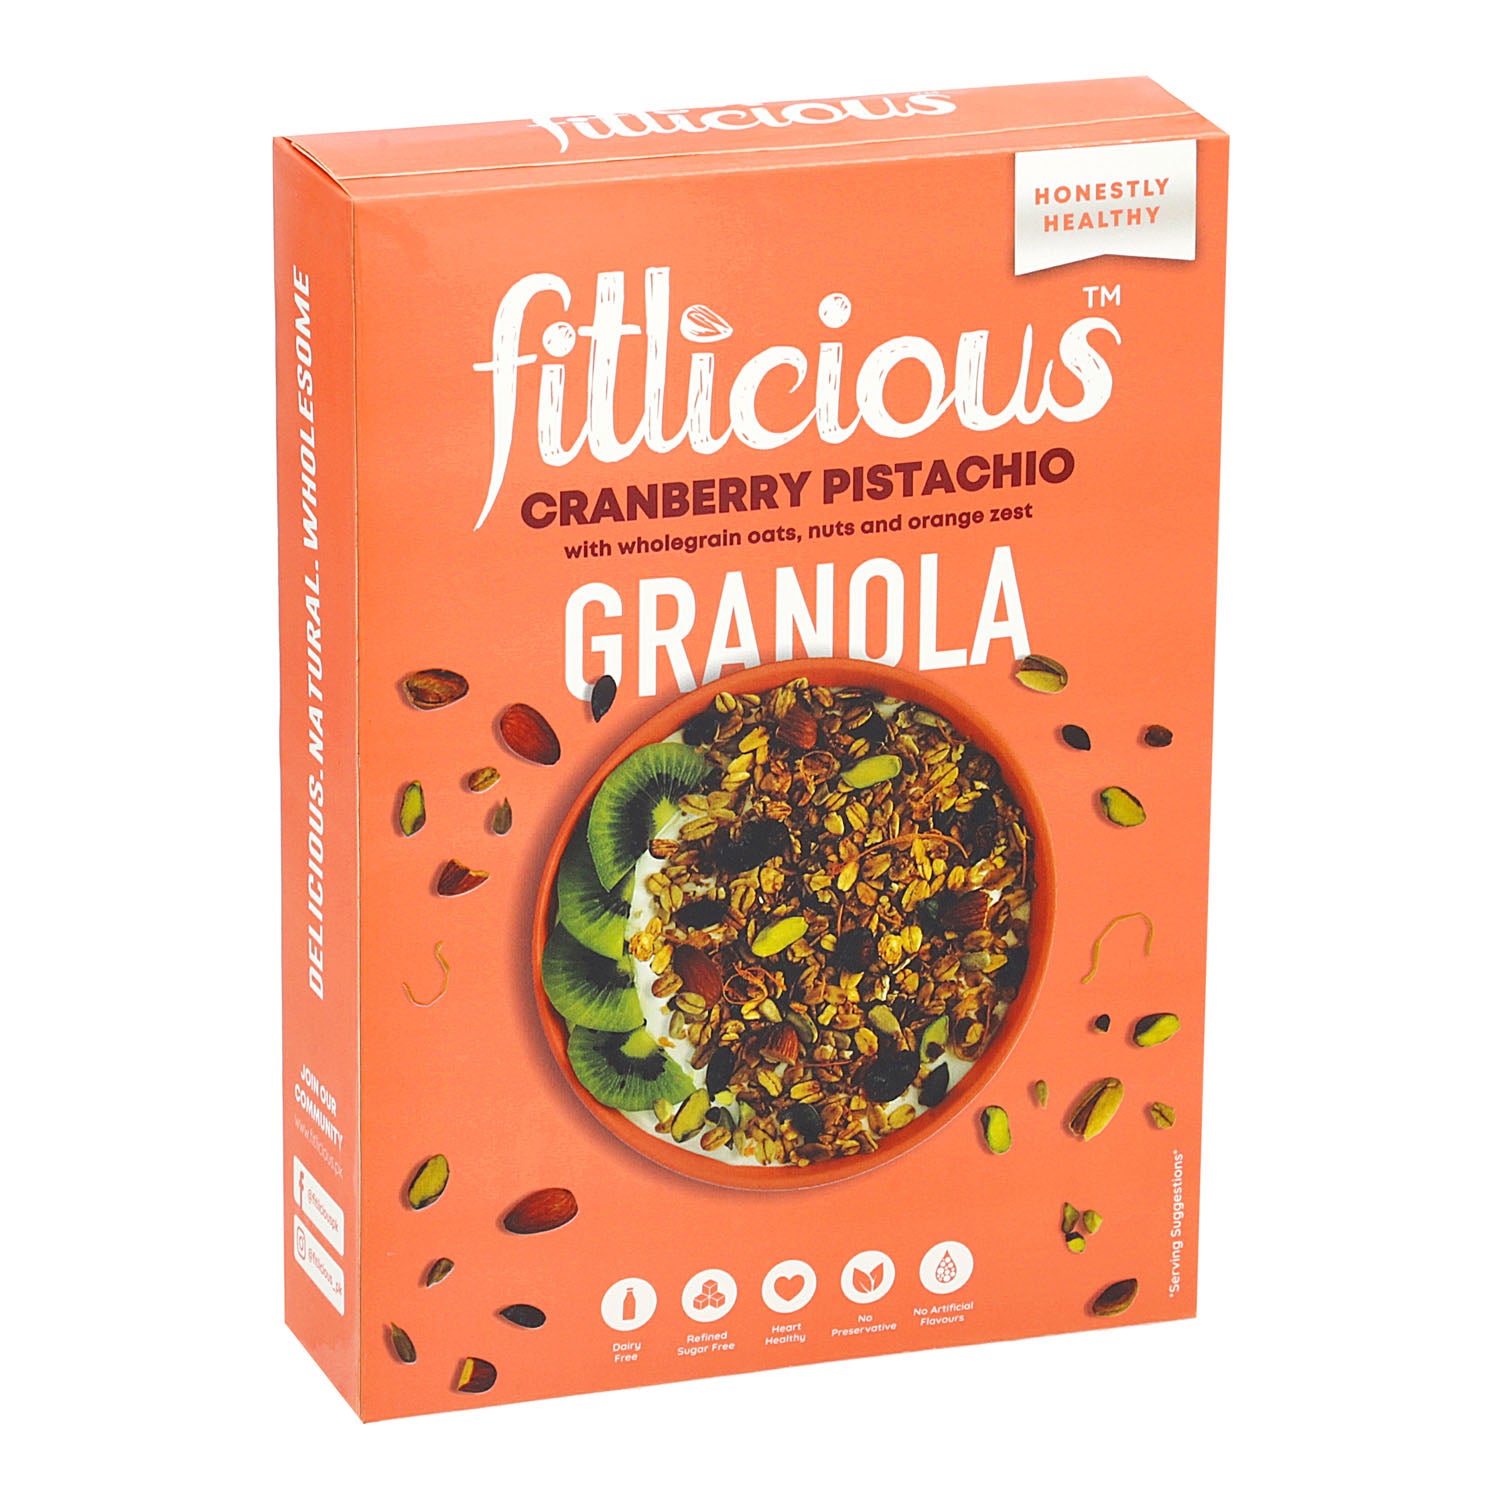 Bundle of 2 - Buy any two Granola (400gms) of your choice